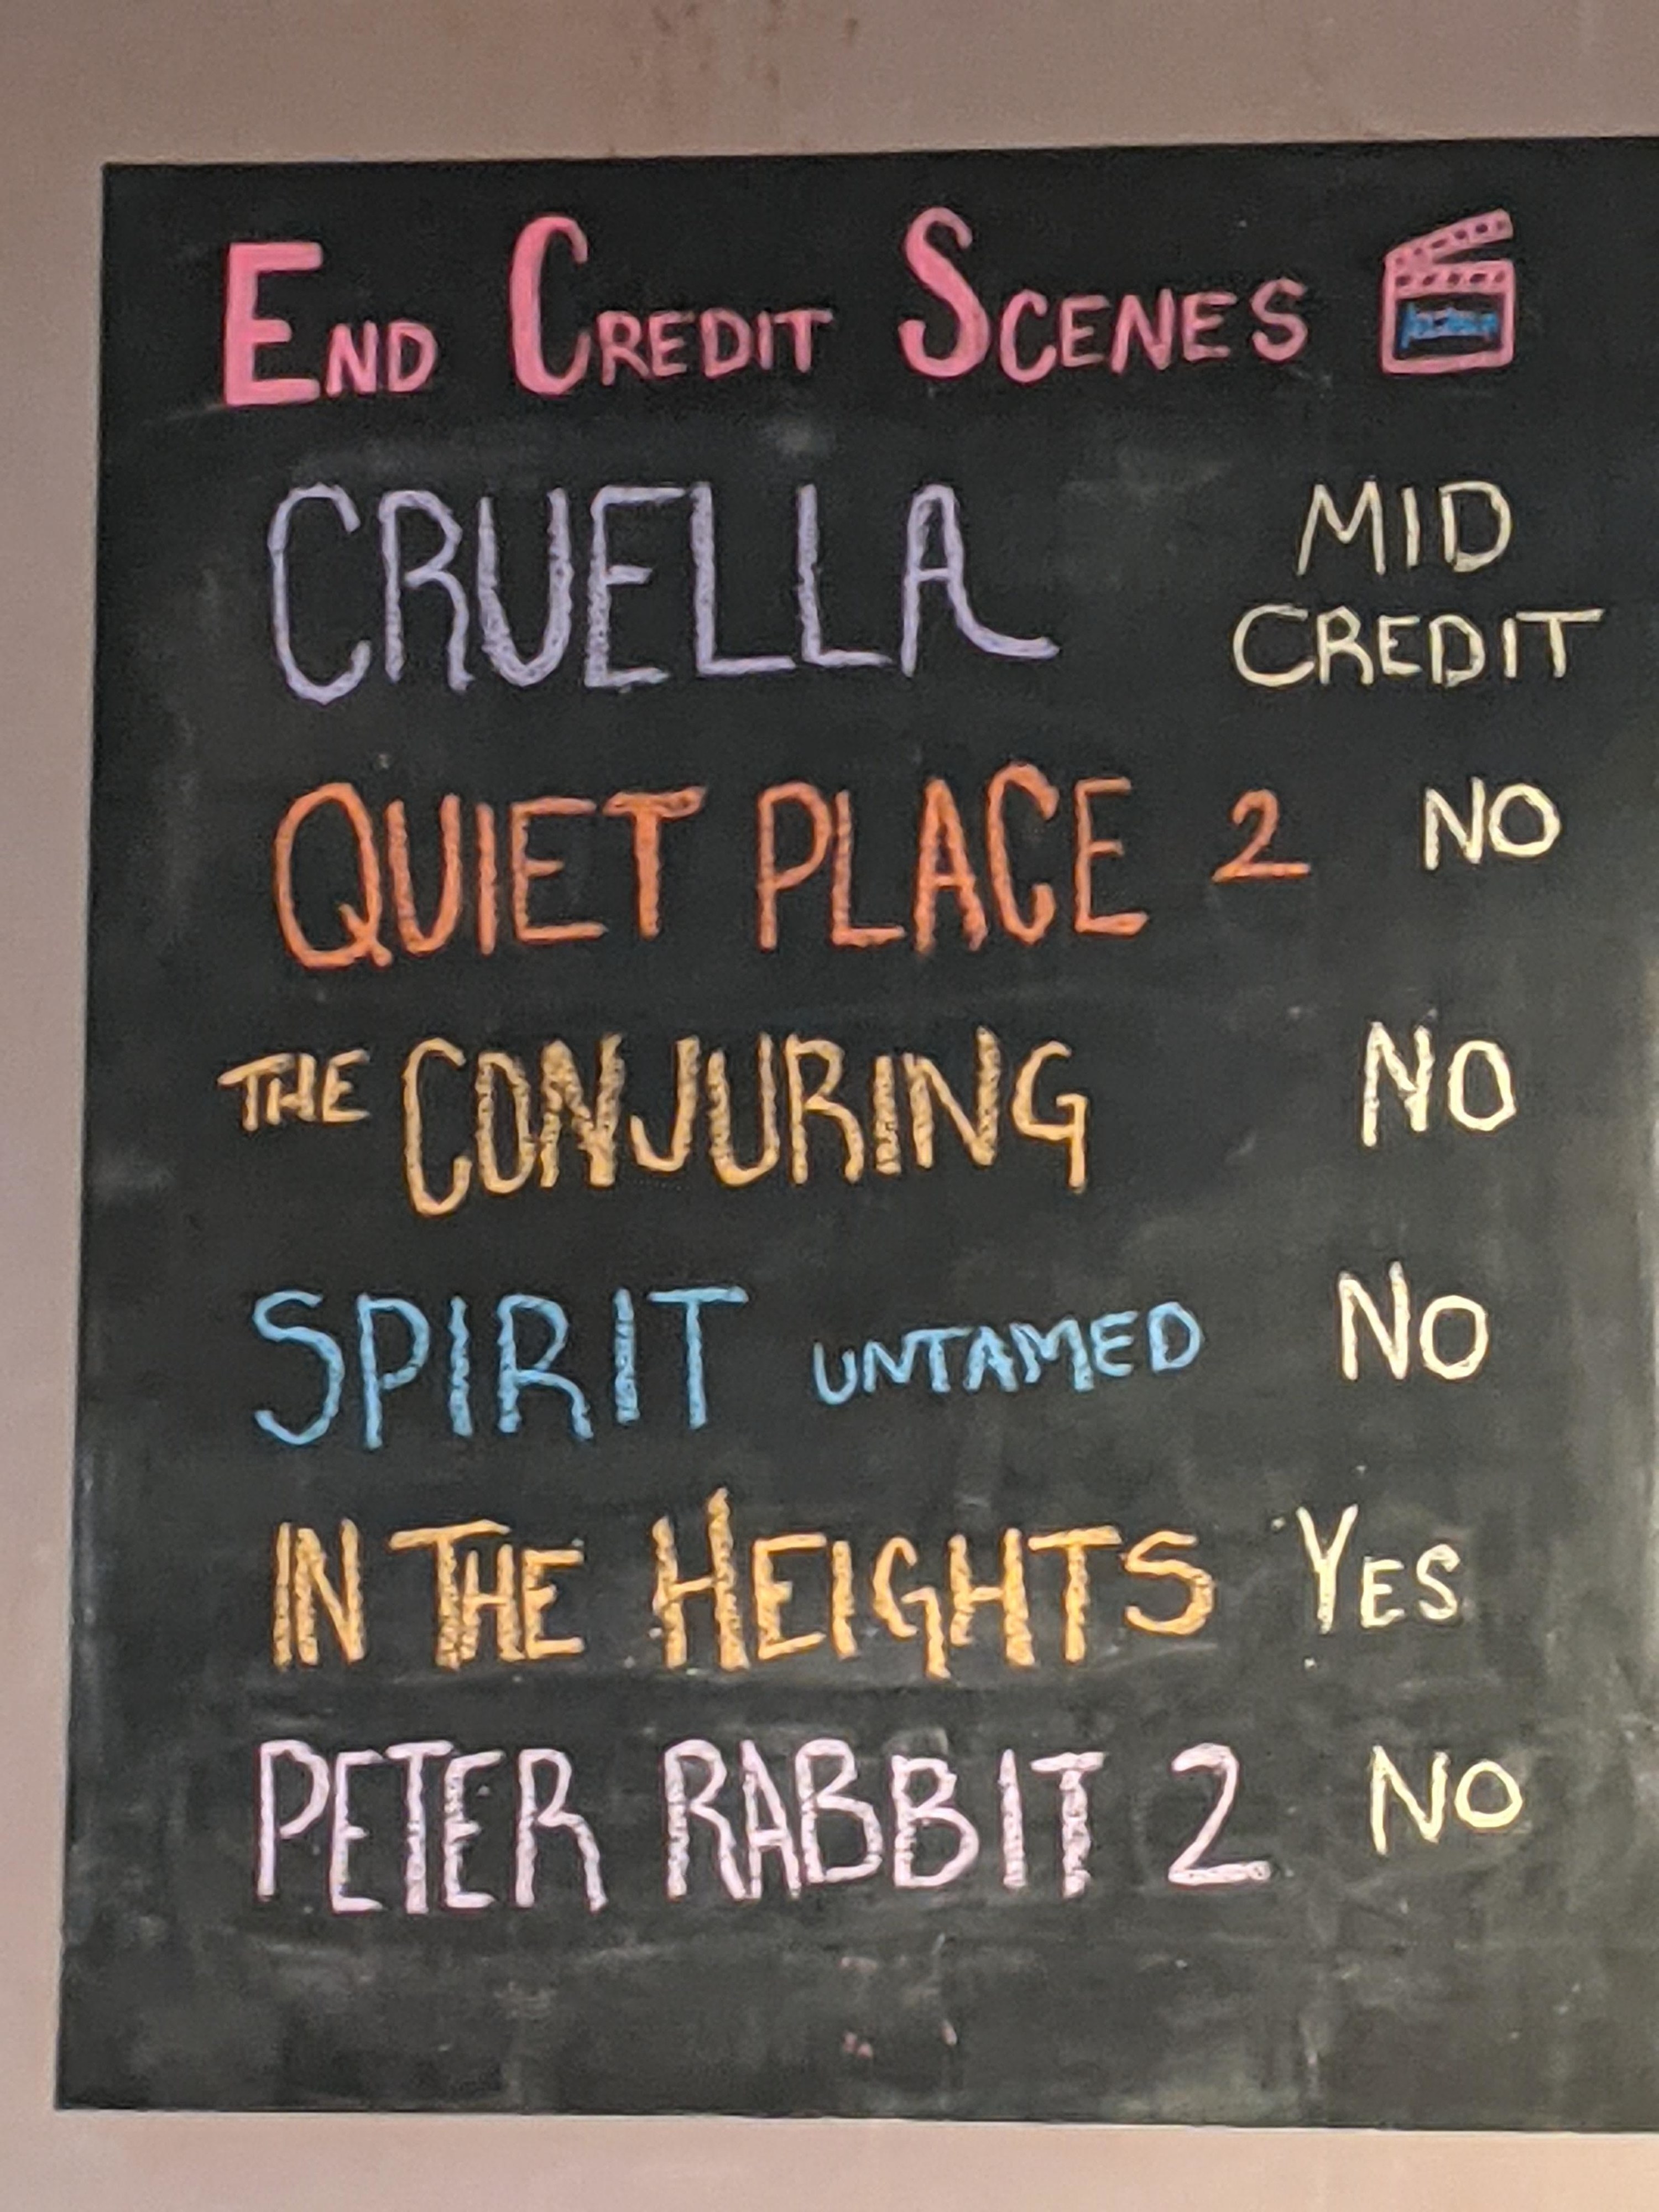 a chalk board with movie titles and either yes or no next to it under the mid credit or end credit section